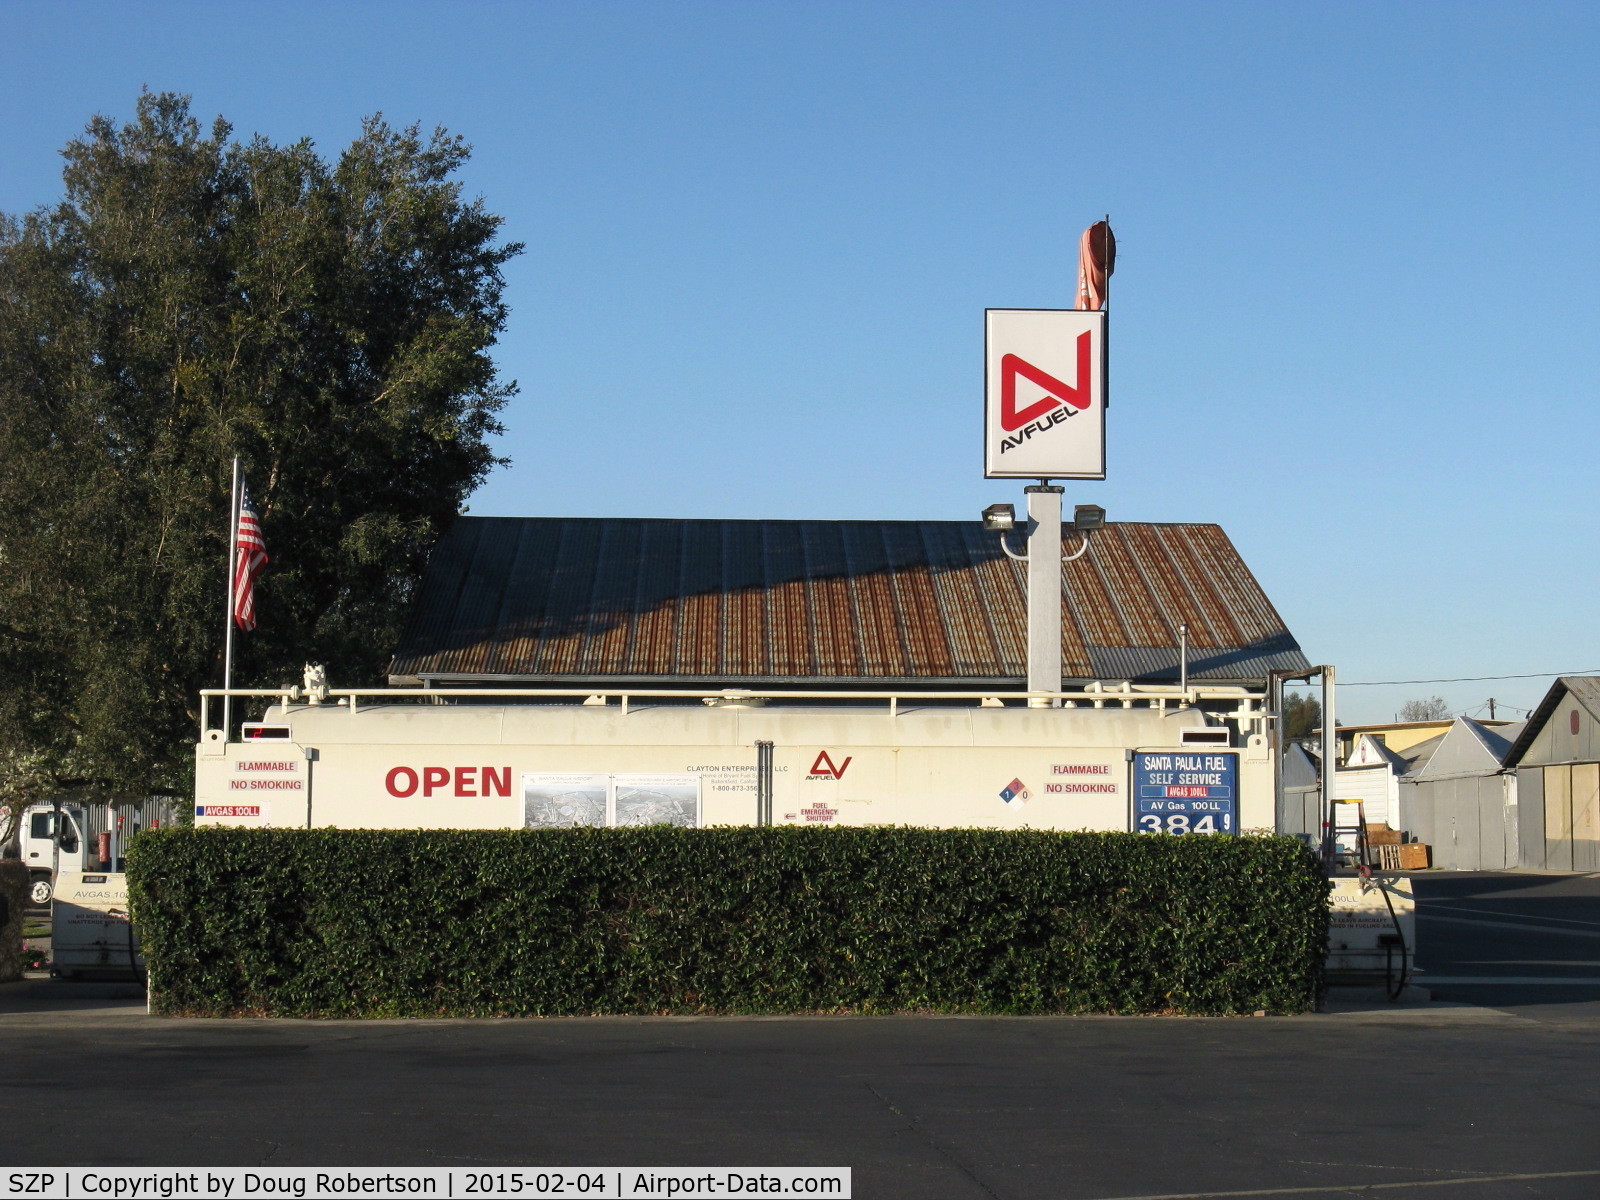 Santa Paula Airport (SZP) - Self-Serve Fuel Dock, 100LL only, note substantially lowered fuel price